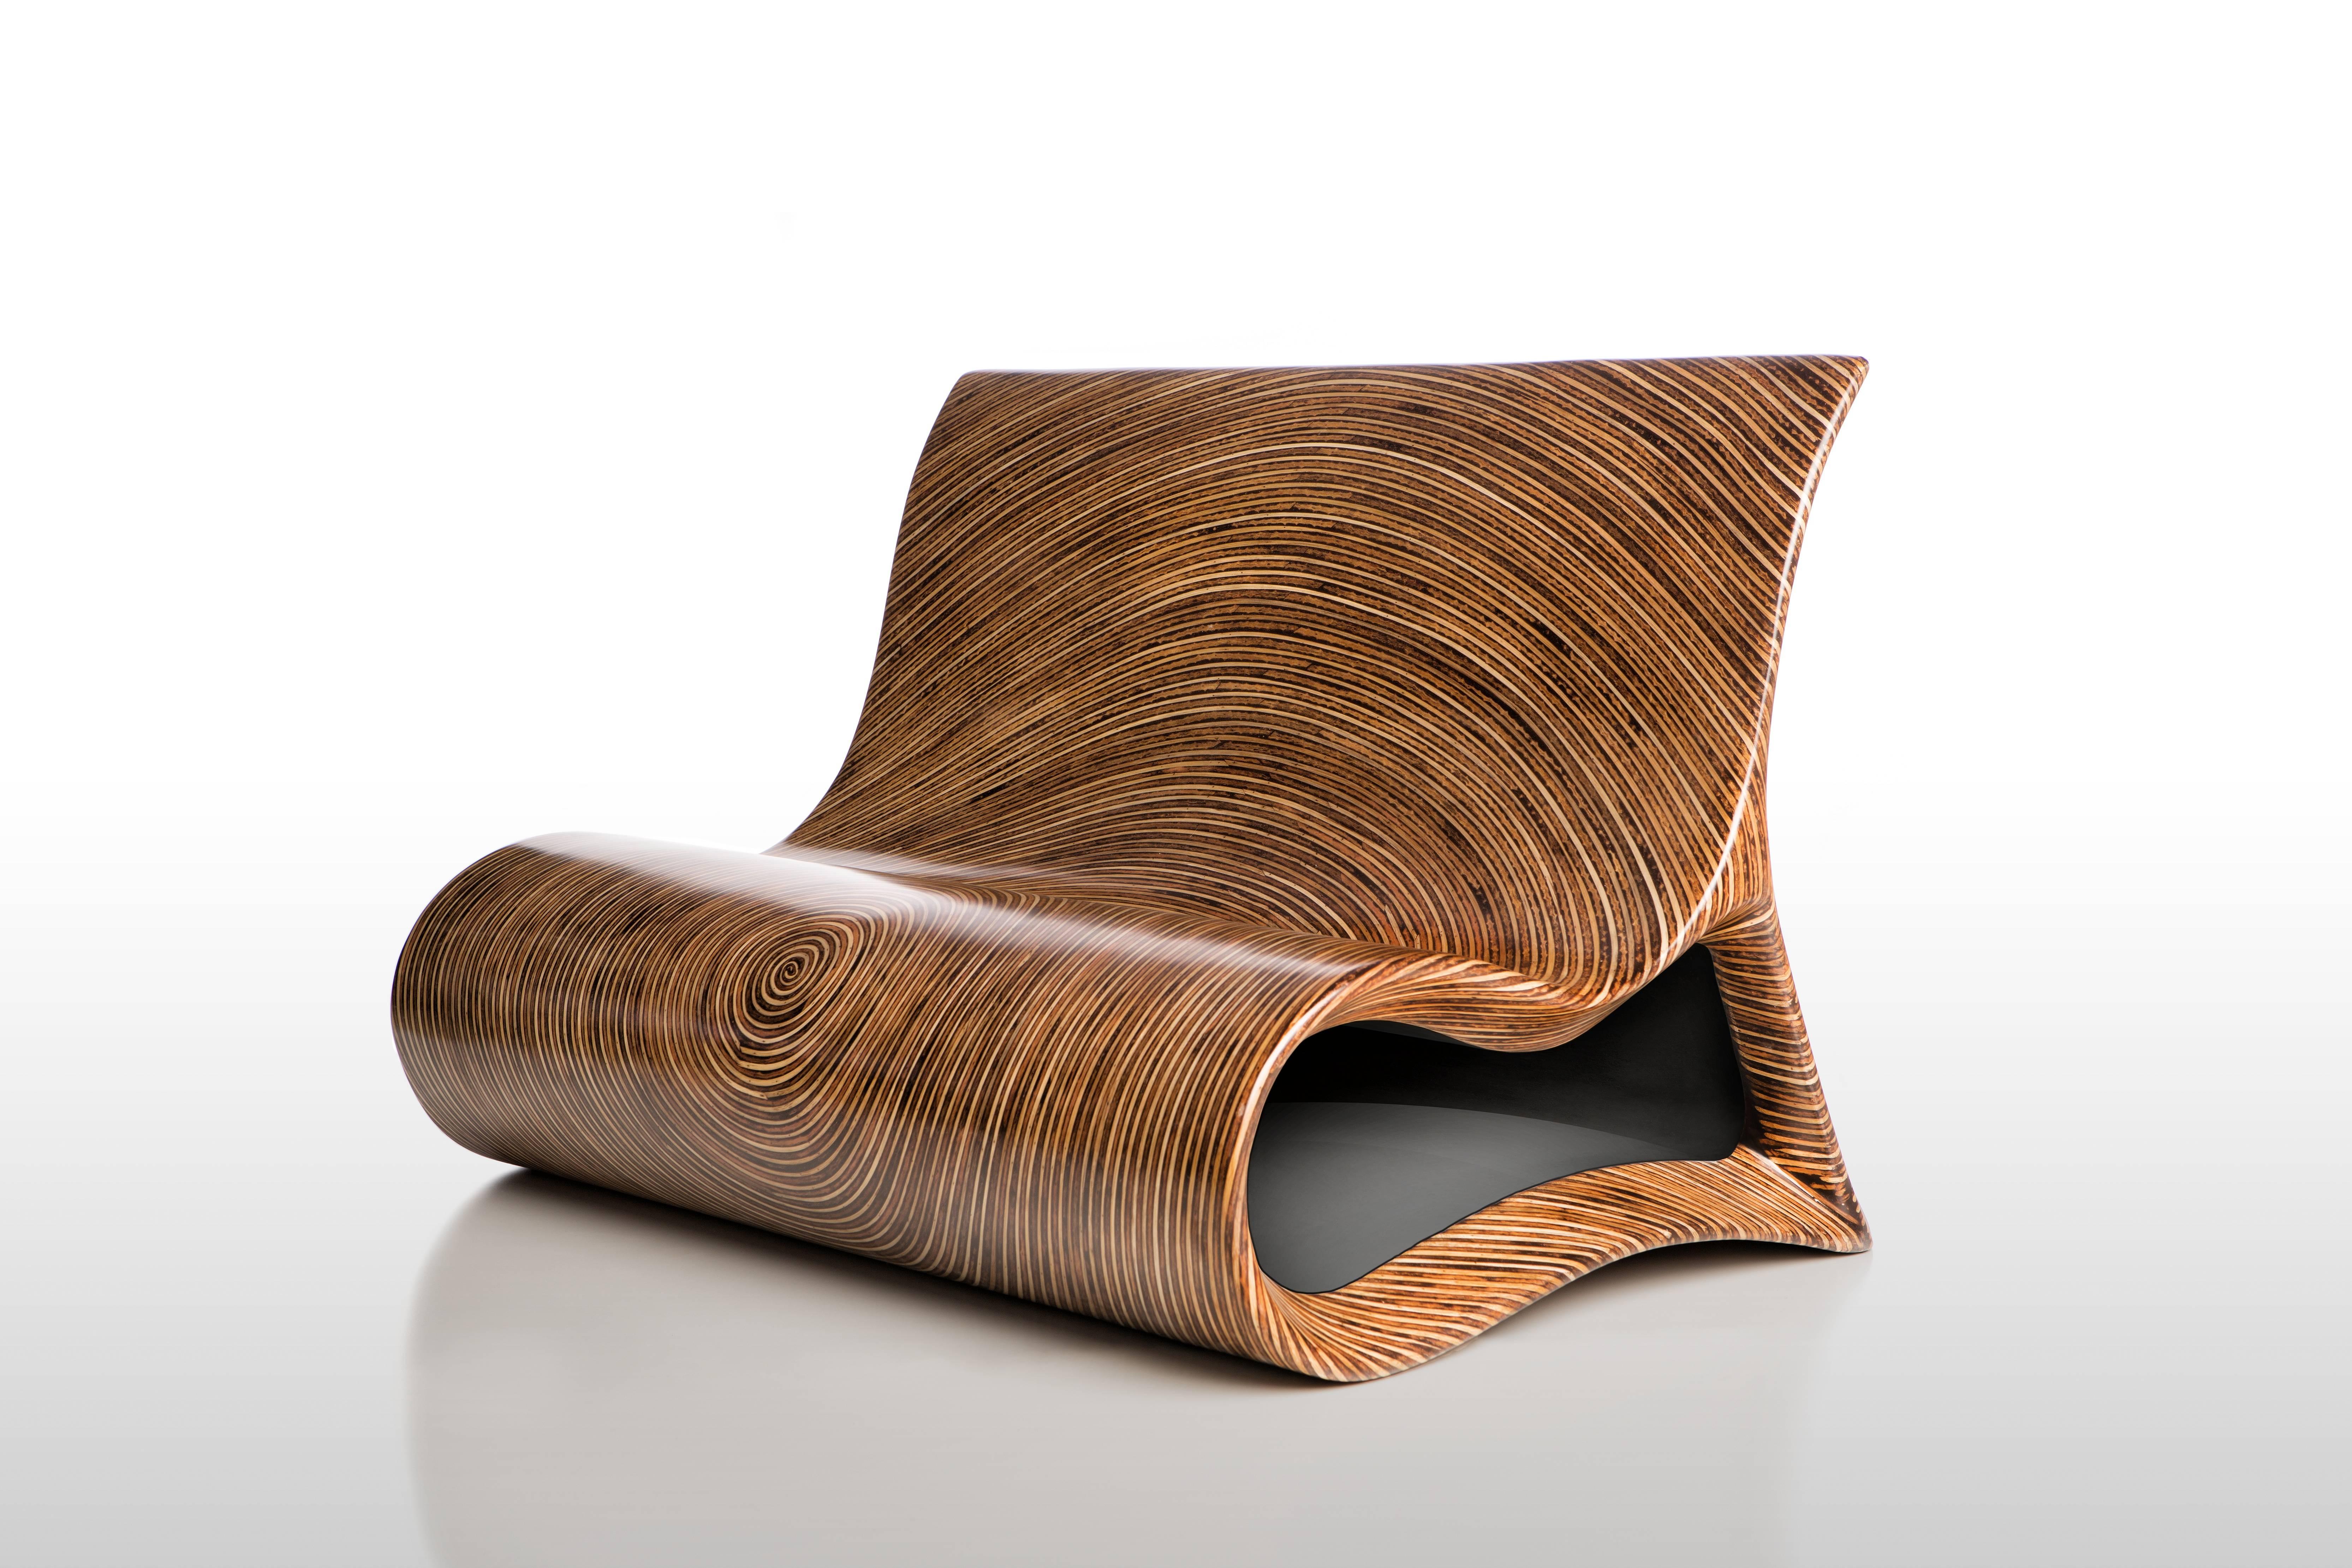 The Altoum double sofa seater is a mesmerizing piece of furniture, with its meandering curves and seemingly endless tree rings. The shape of this seat takes inspiration from Op Art whilst the sophisticated wood lamination finish breathes life into